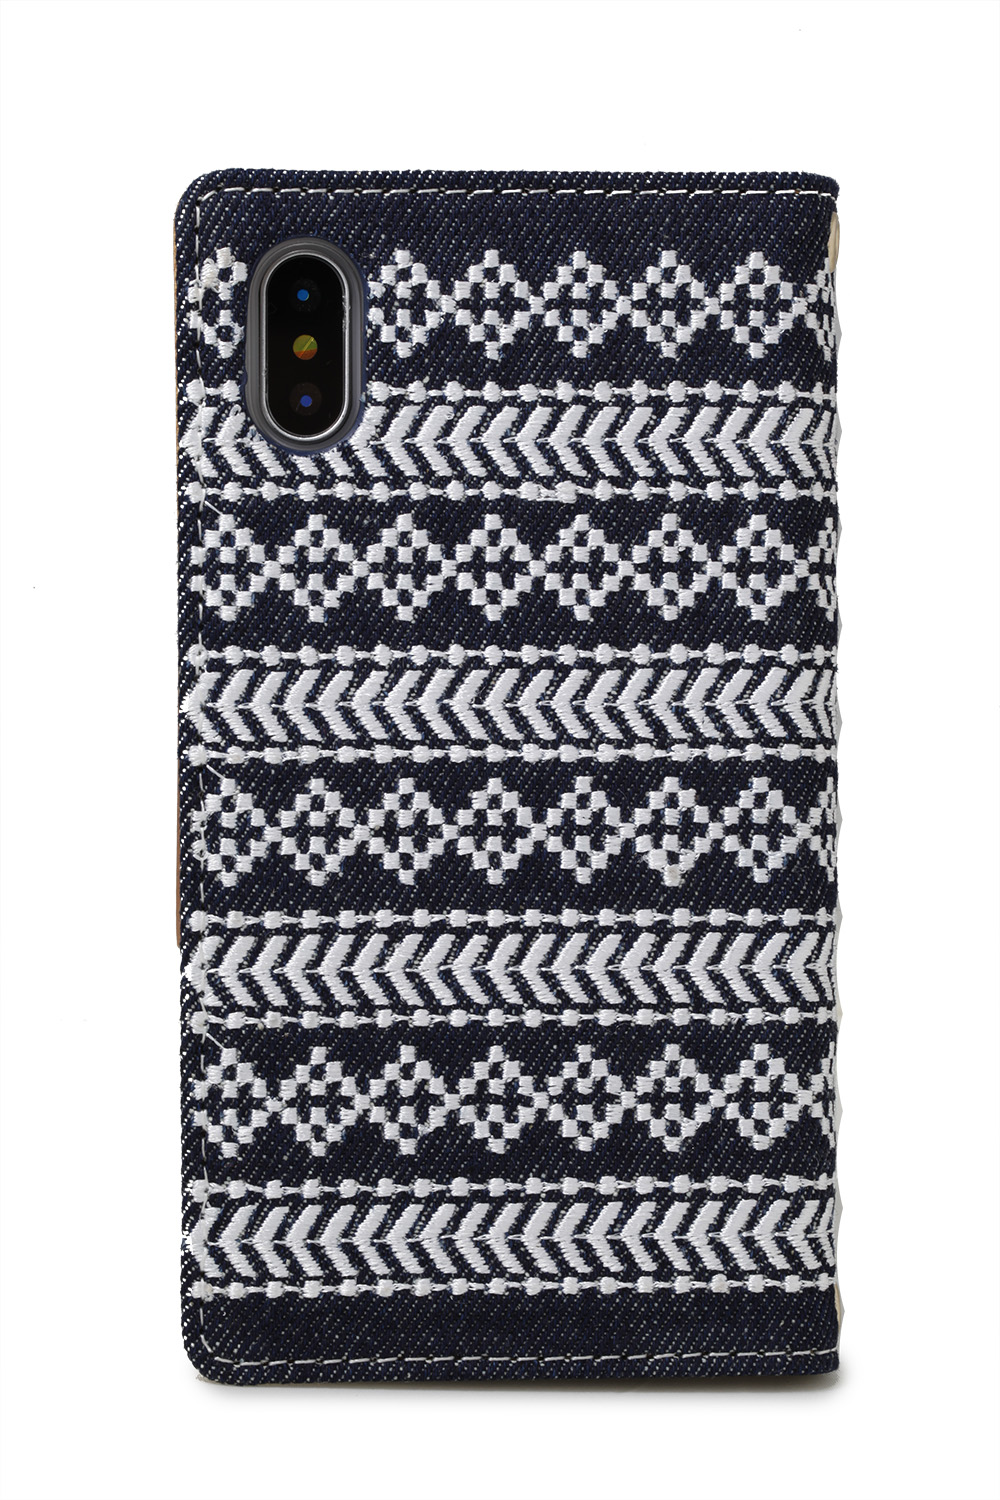 Folklore Diary For iPhone X Case